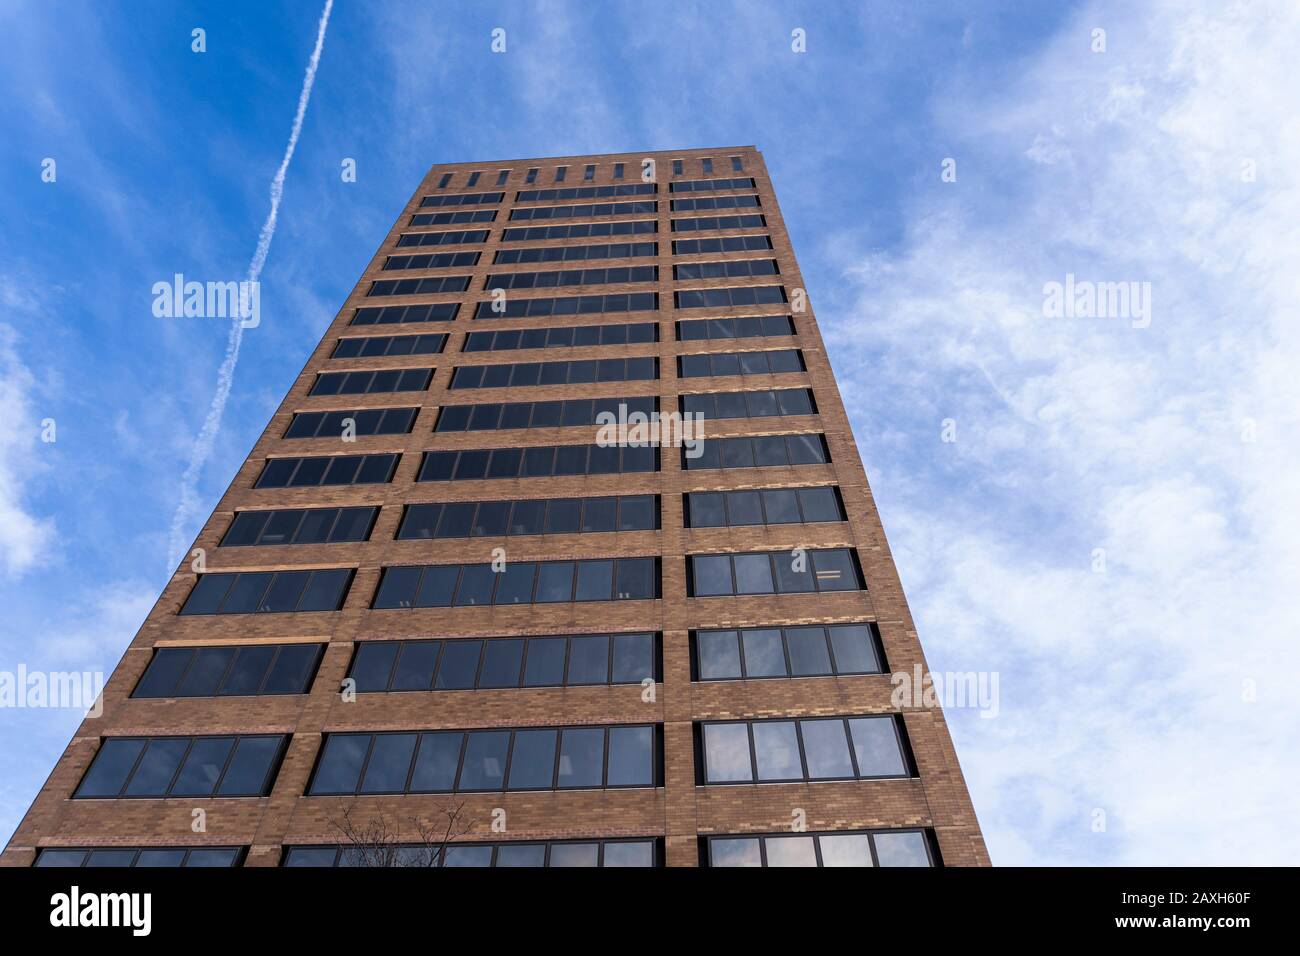 SYRACUSE, NEW YORK - FEB 05, 2020: High Angle View of Darwin On Clinton Tower in Downtown Syracuse. Stock Photo